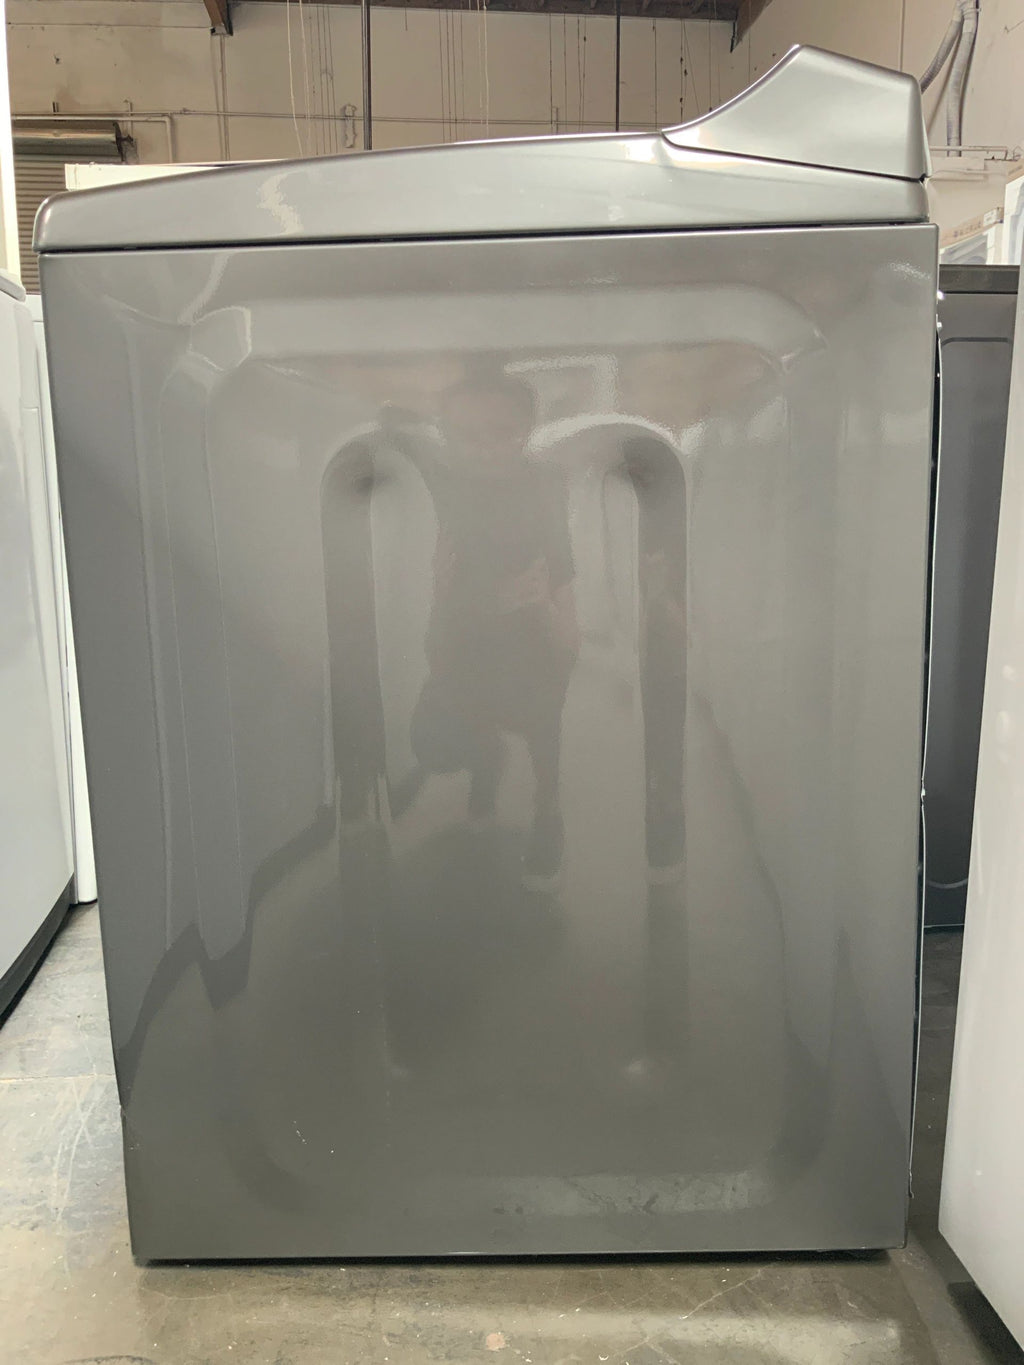 New Open Box. 4.8 cu. ft. High-Efficiency Chrome Shadow Top Load Washer with Built-In Water Faucet in Intuitive Touch Controls. Model: WTW7500GC